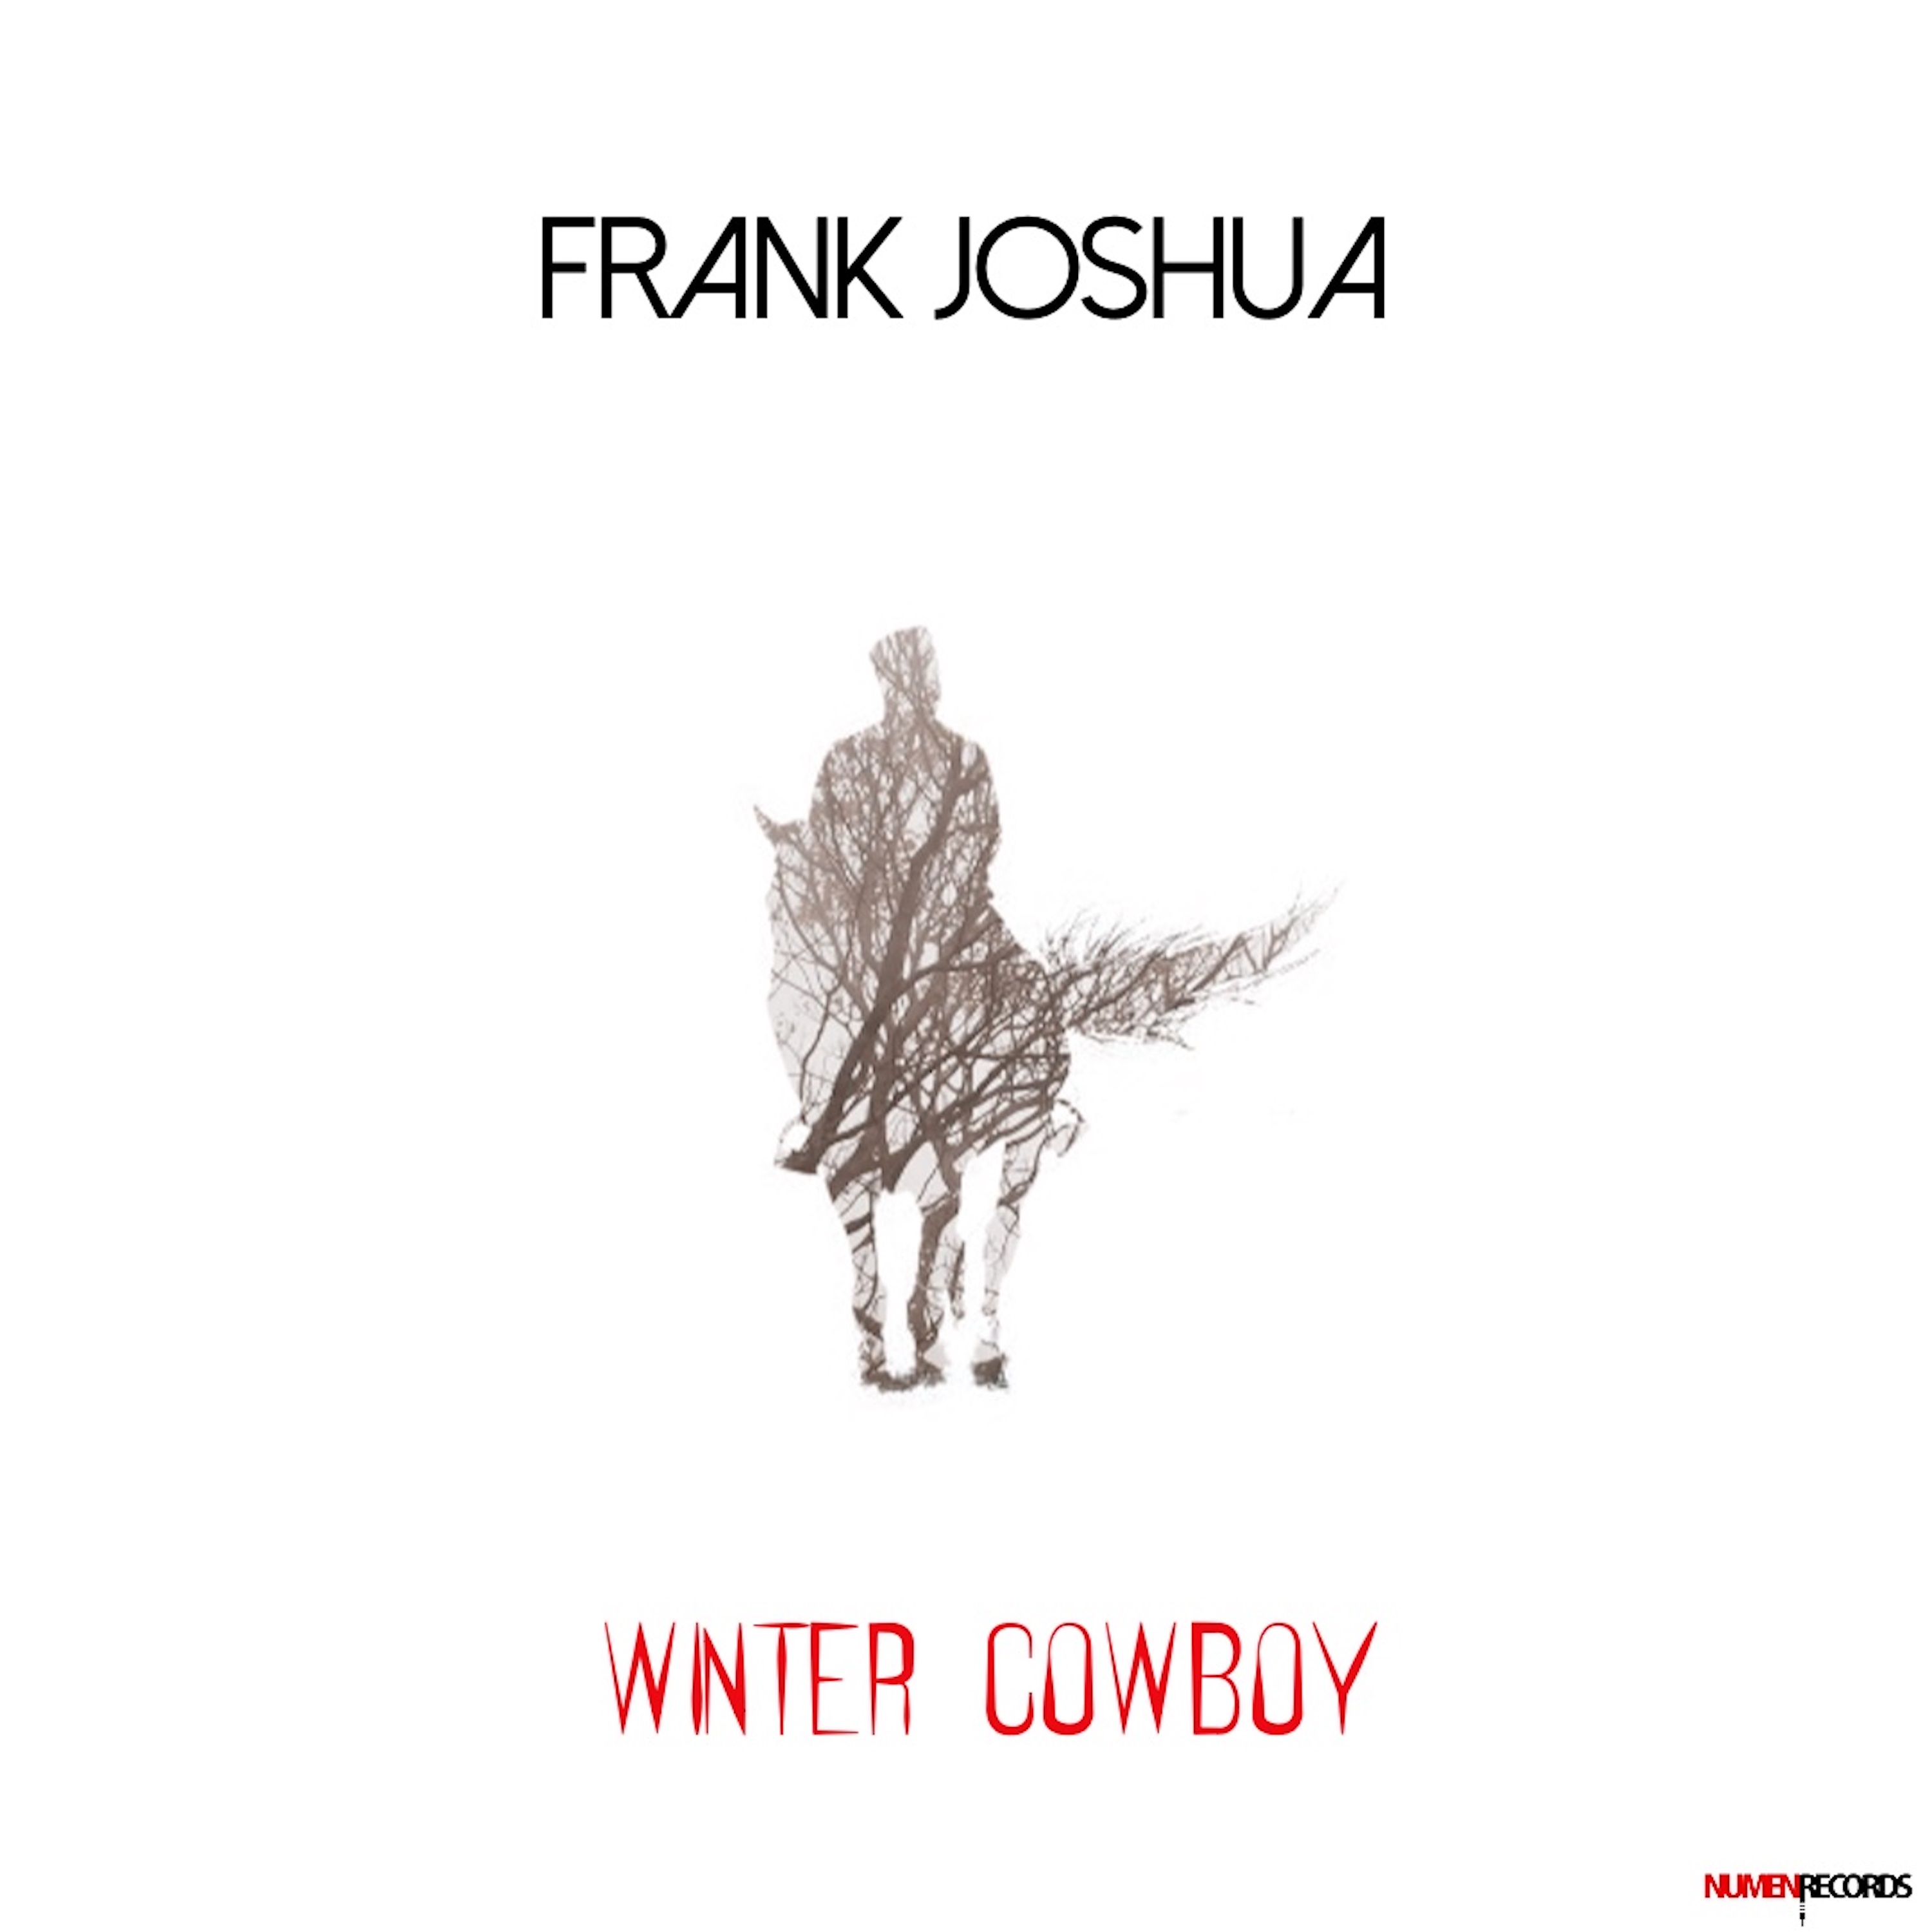 Frank Joshua’s new soulful single “Winter Cowboy” is an emotional path through the vastness